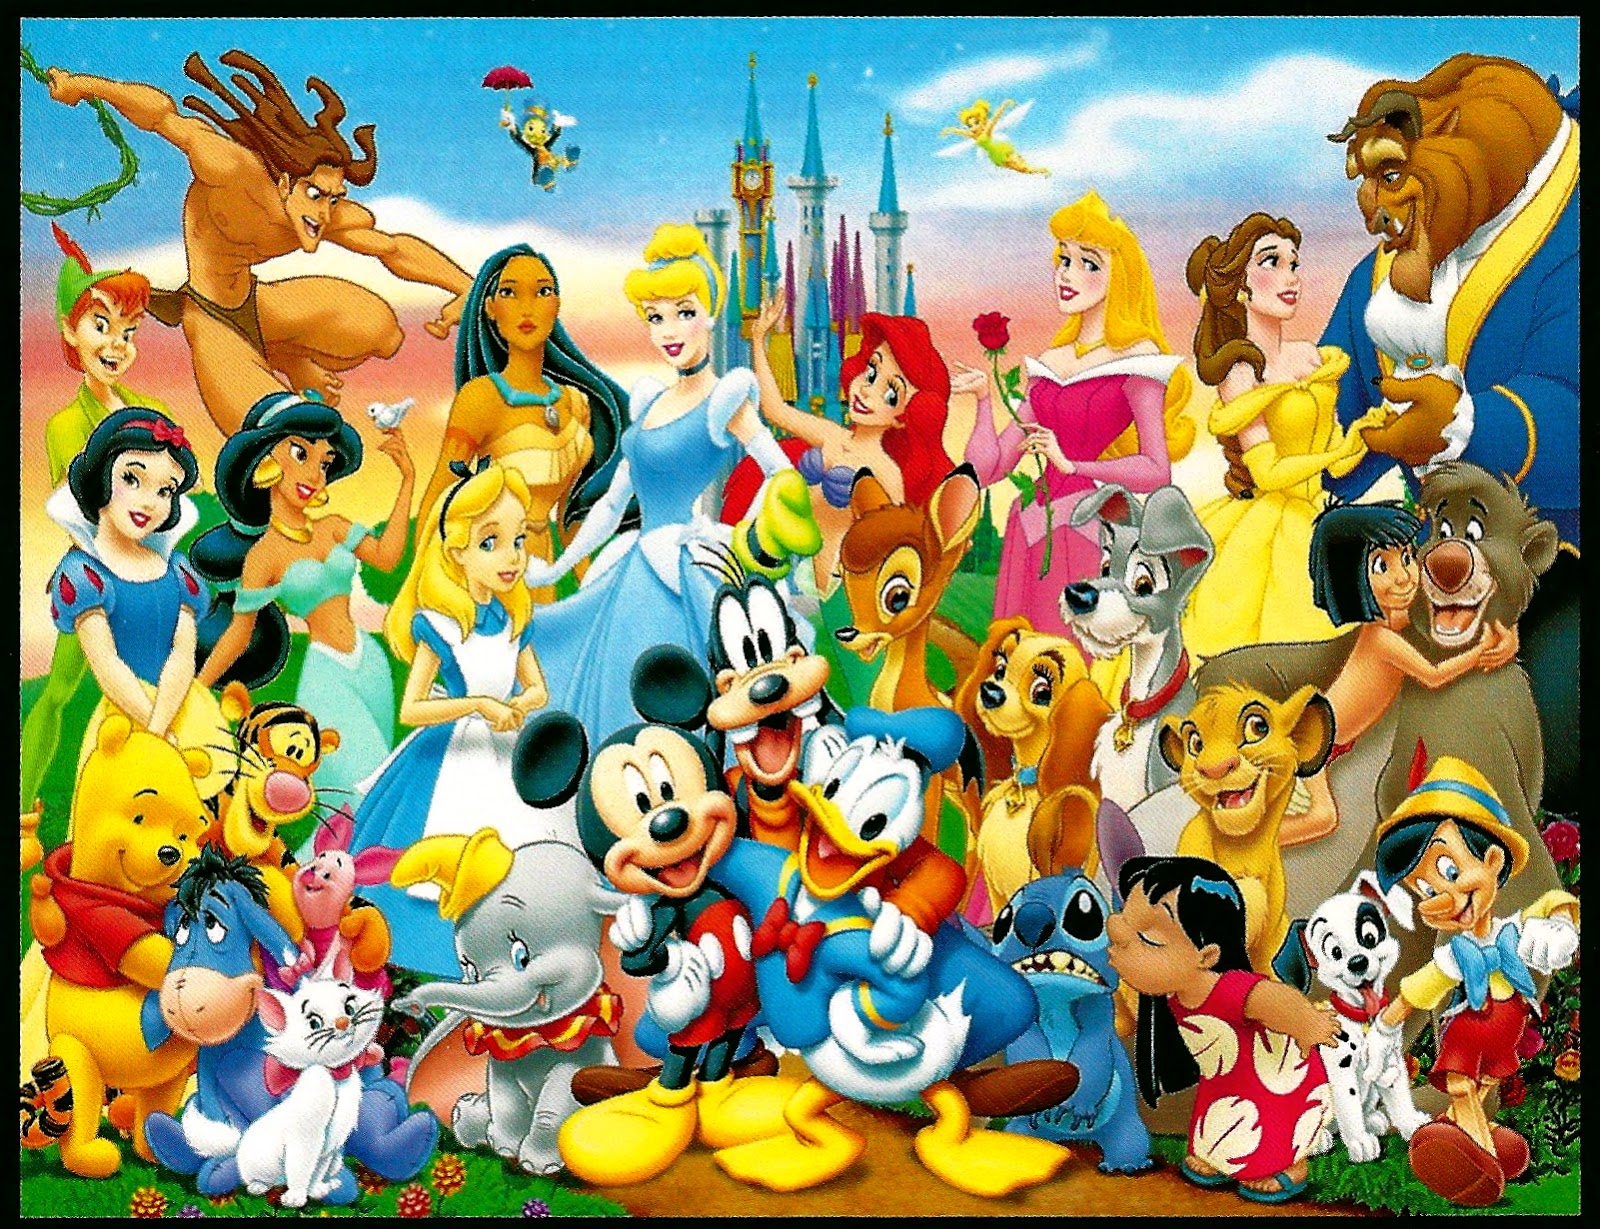 My Favorite Disney Postcards: Disney Postcard Featuring Everyone by the